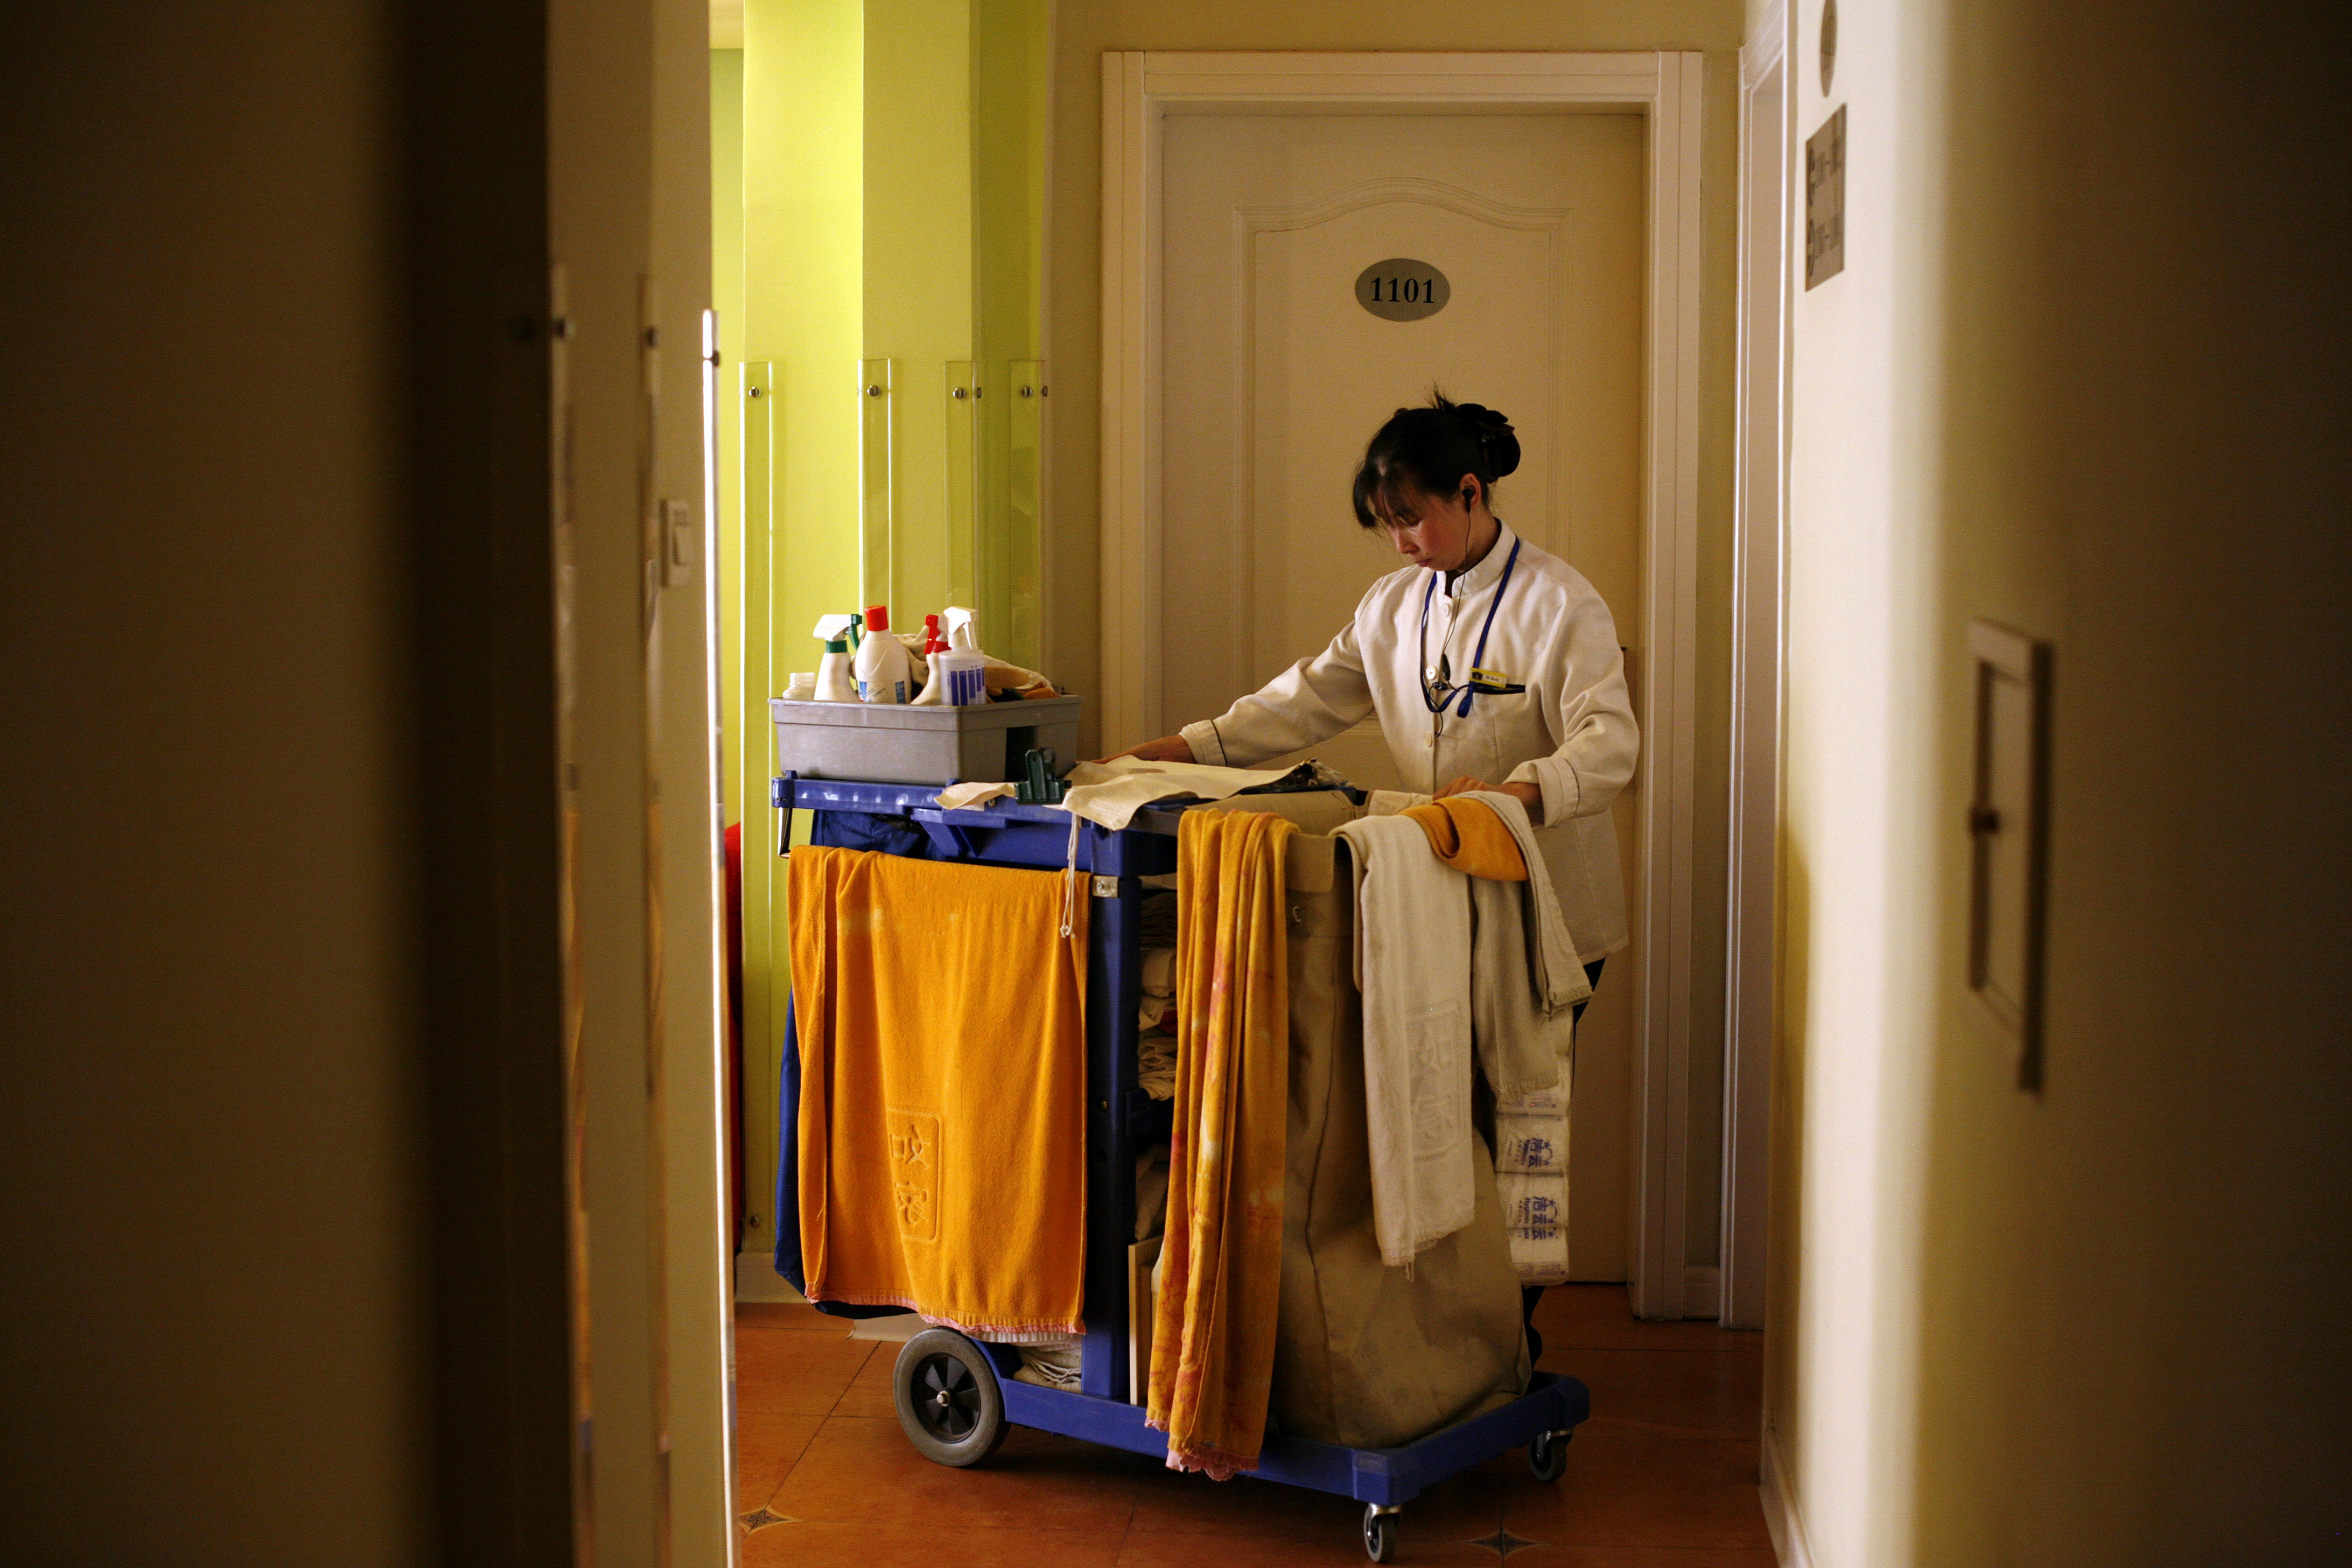 A hotel maid enters a room with a cart of cleaning supplies.